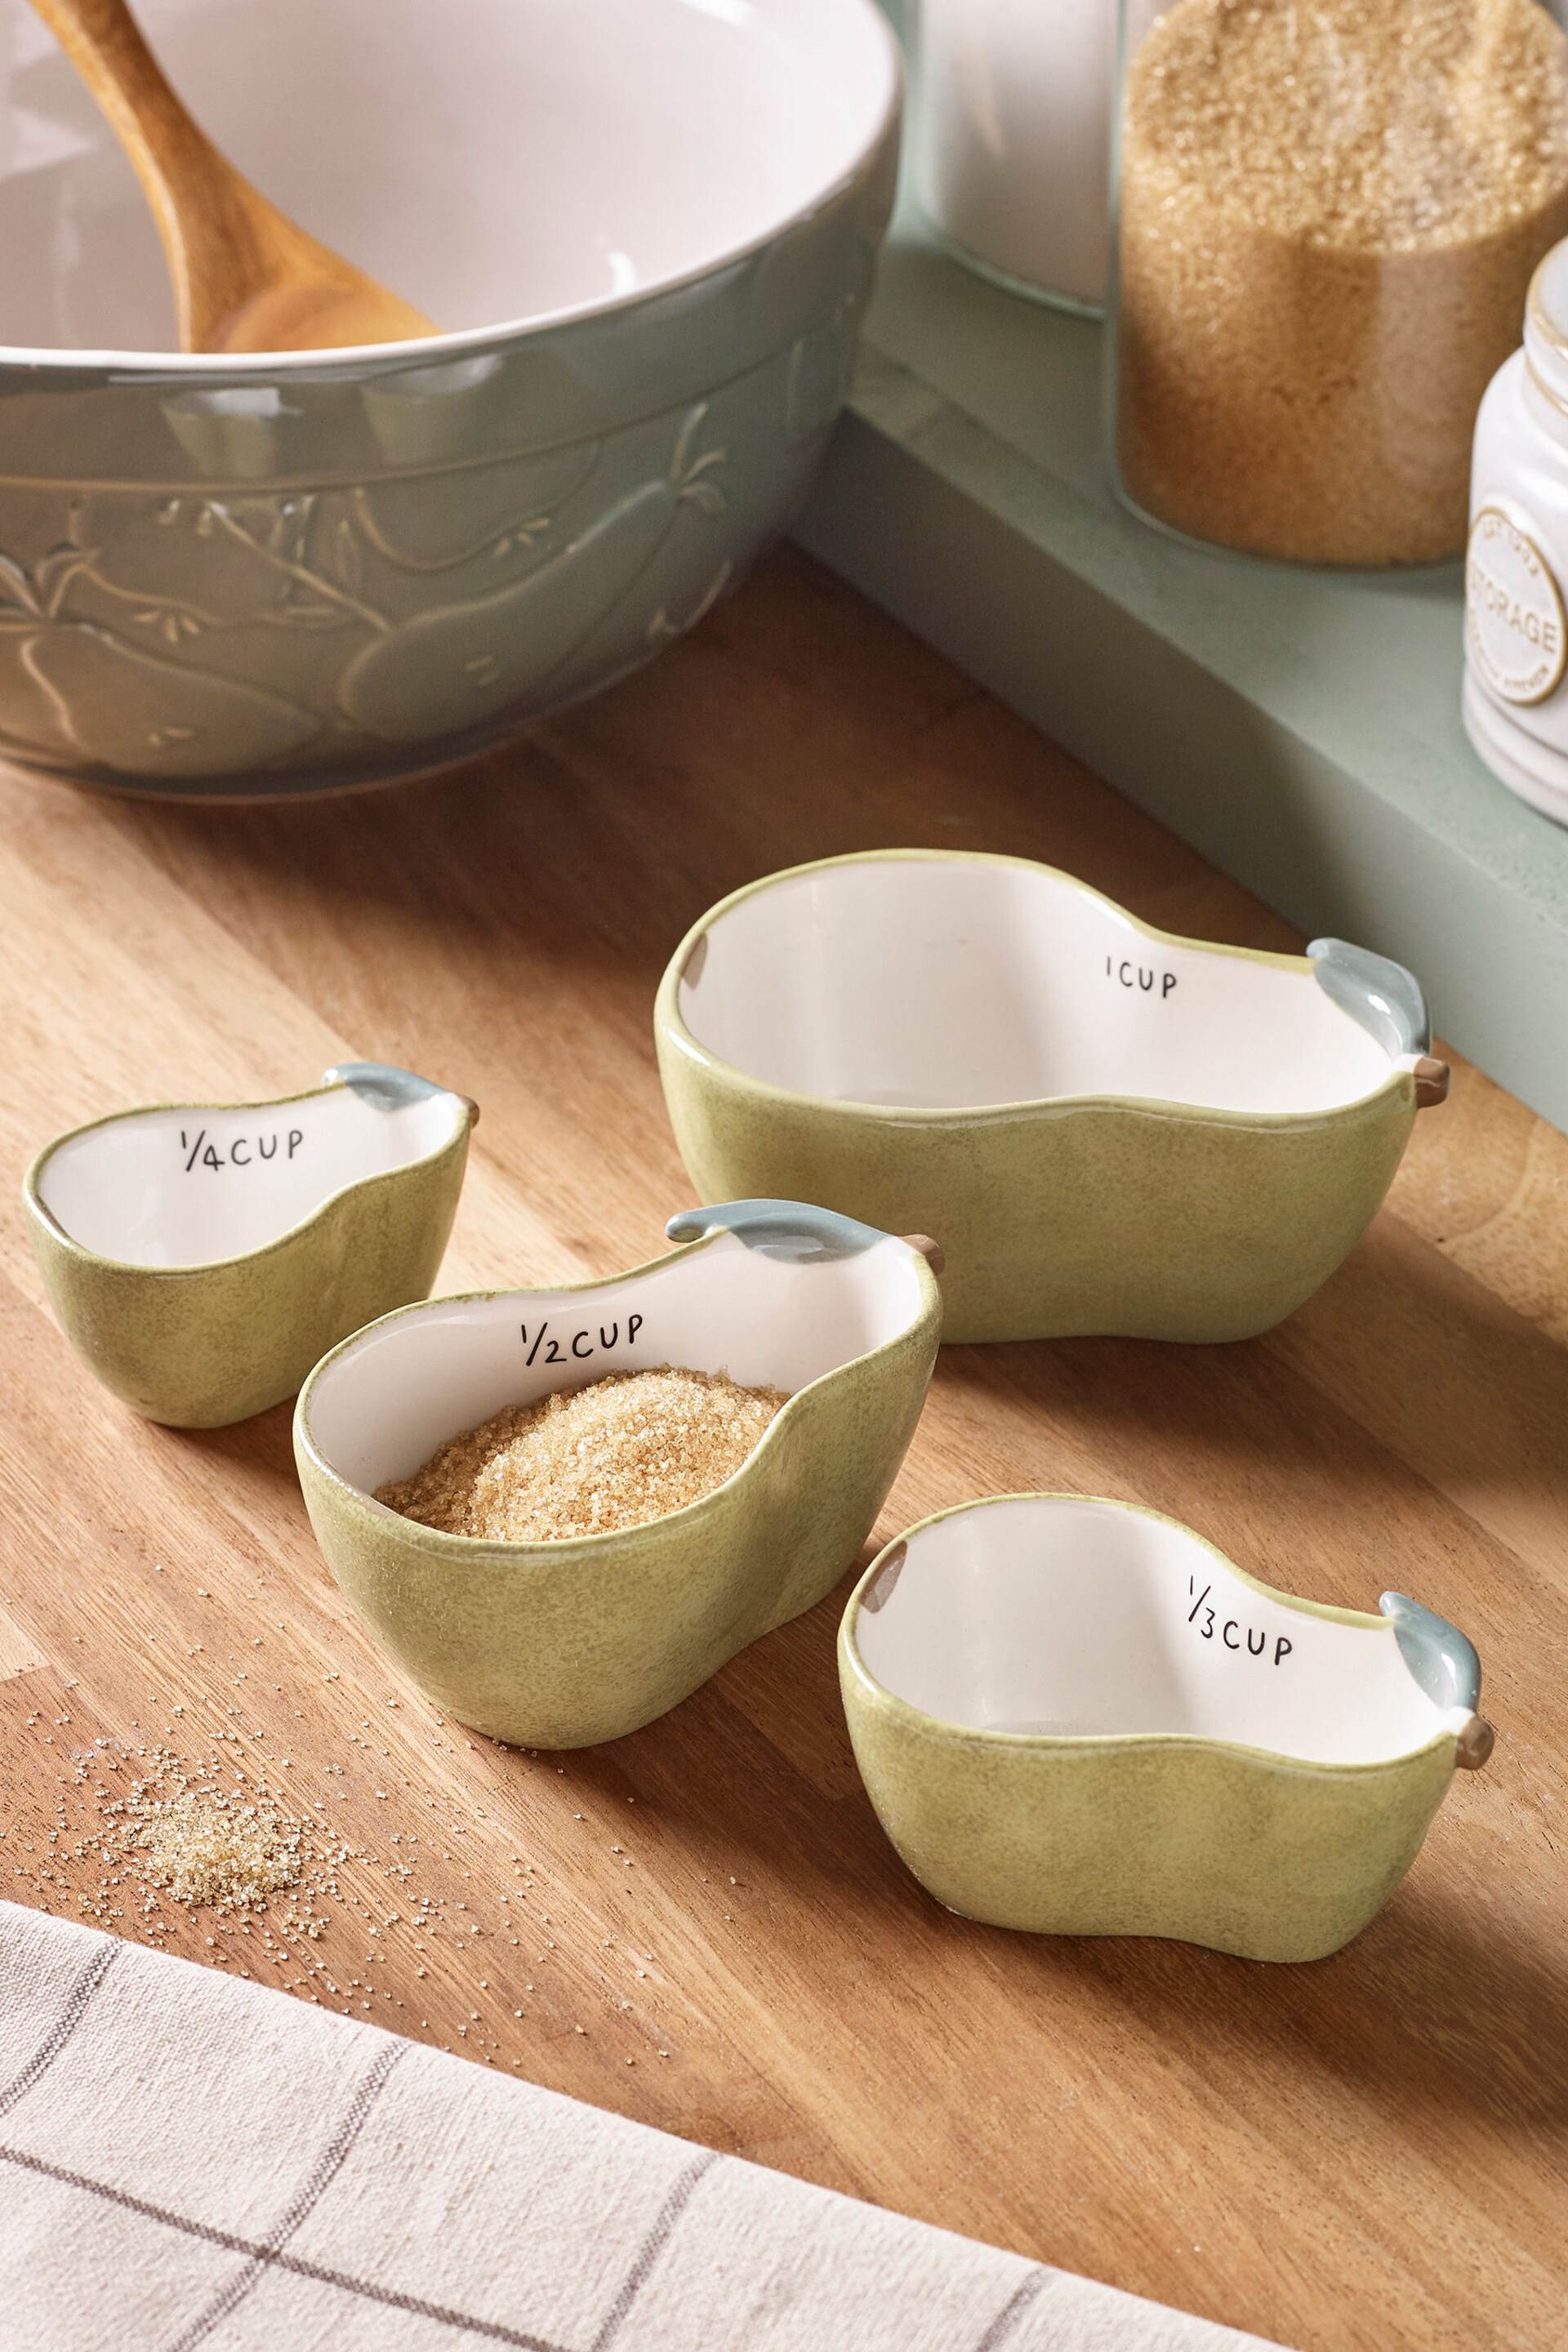 Set of 4 Green Pear Measuring Cups - Image 1 of 4